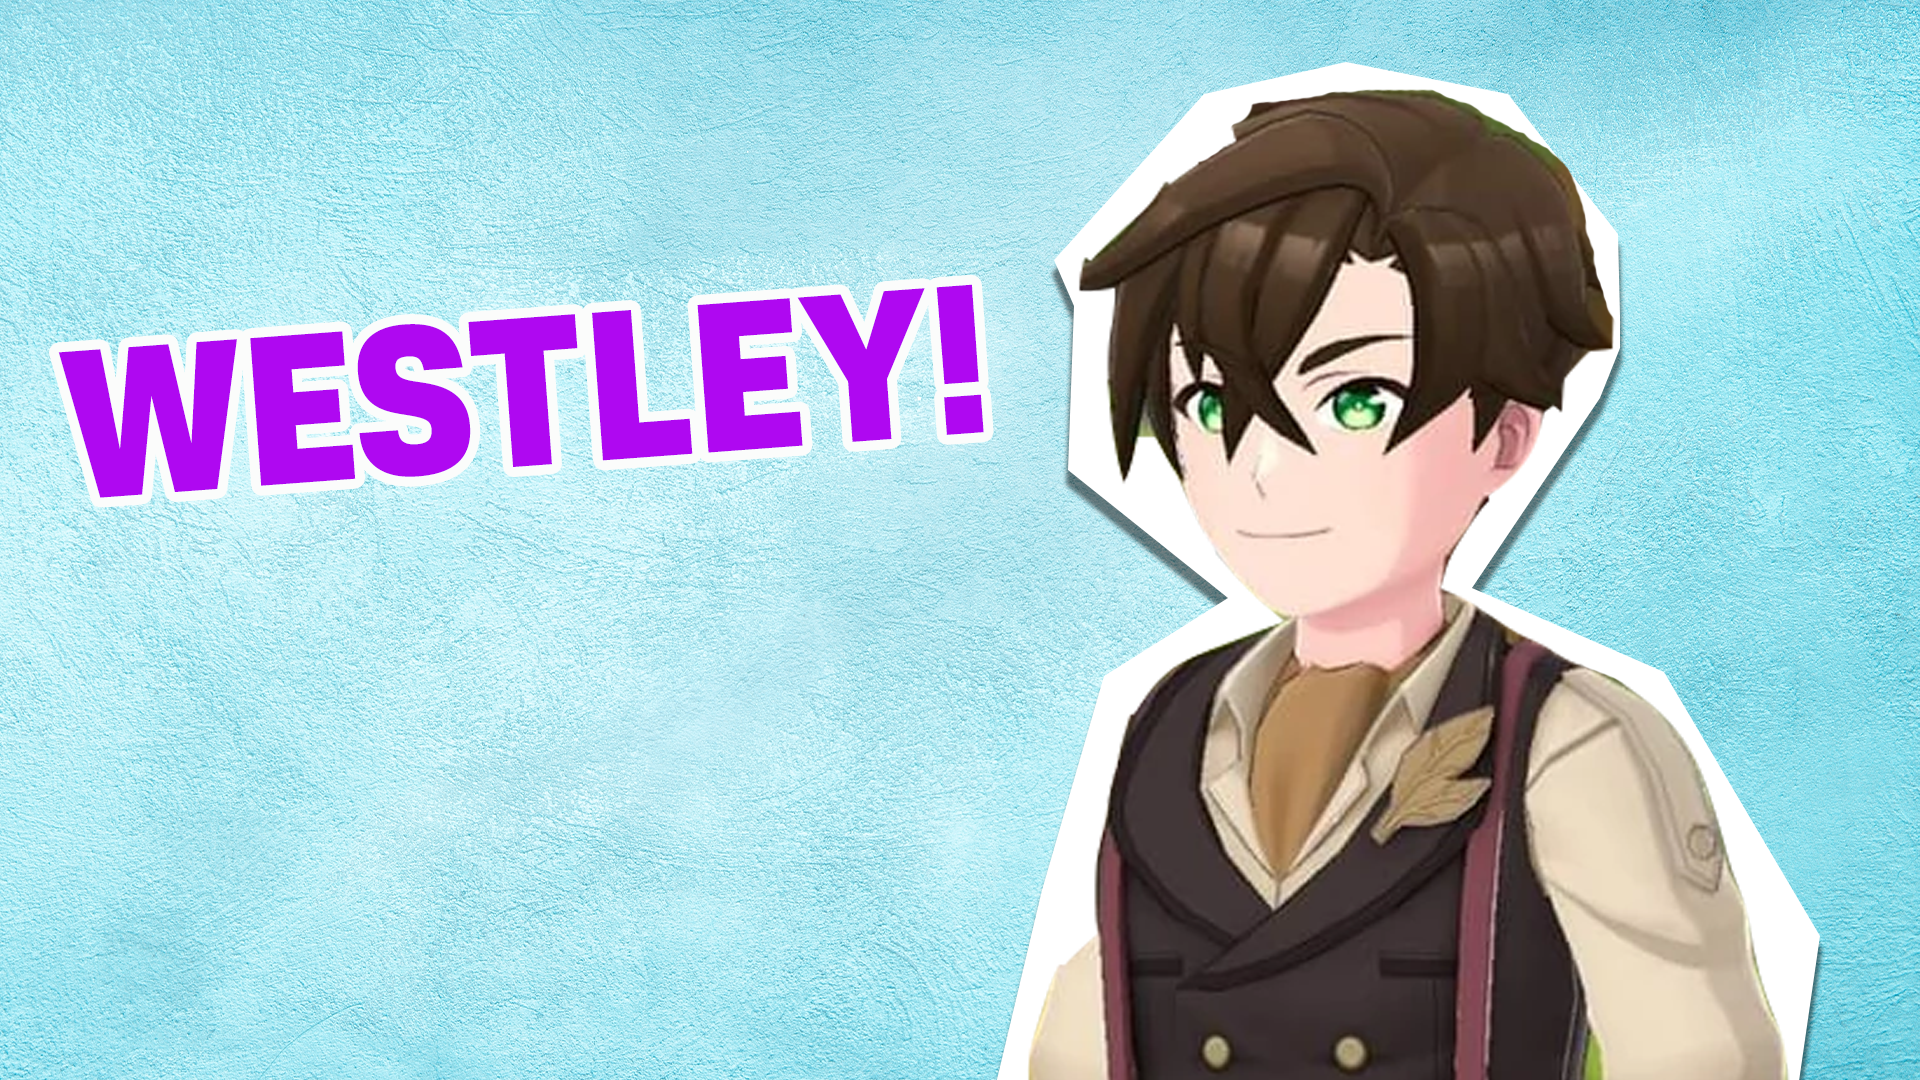 You're Westley! Just like Westley you're a good leader and always make sure you know exactly what's going on - although you can also be fun and easy going too!